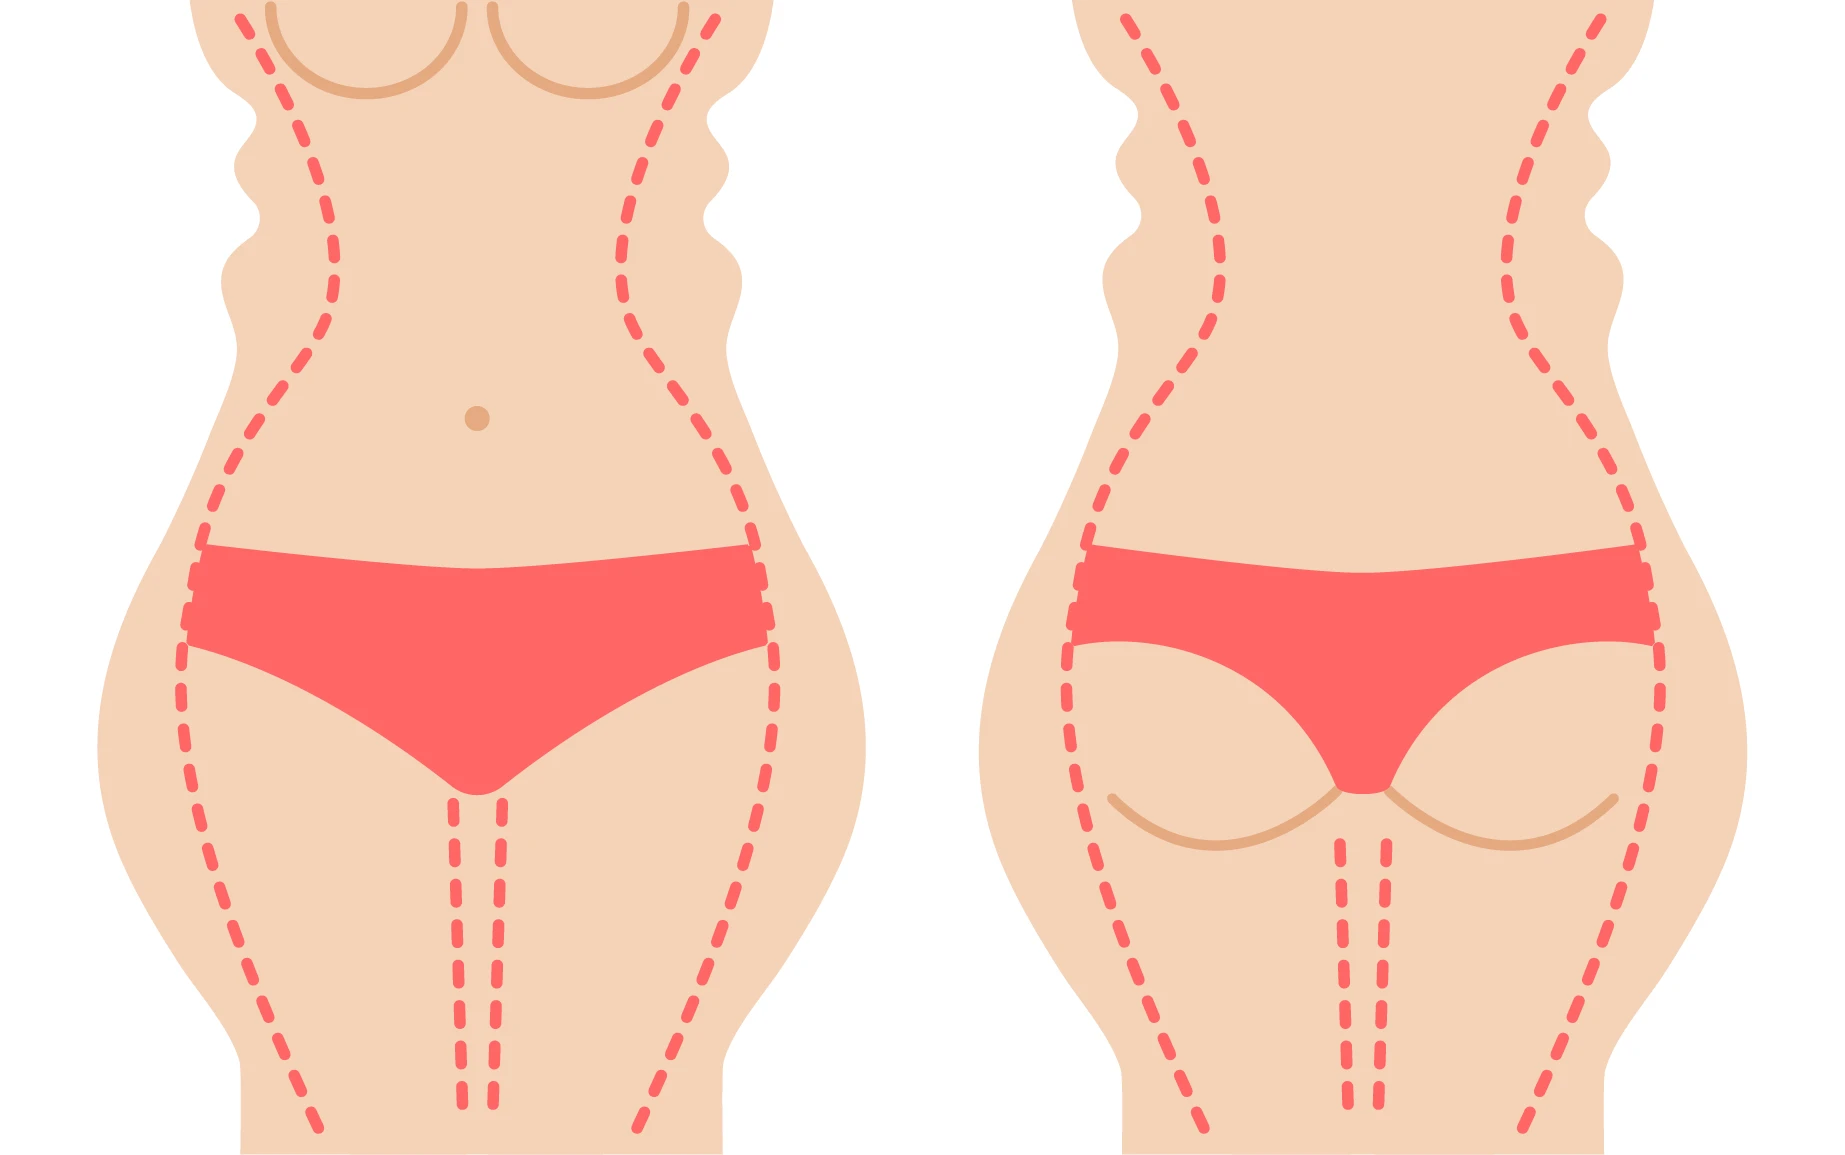 1773-body-contouring-image-16920987660432.png